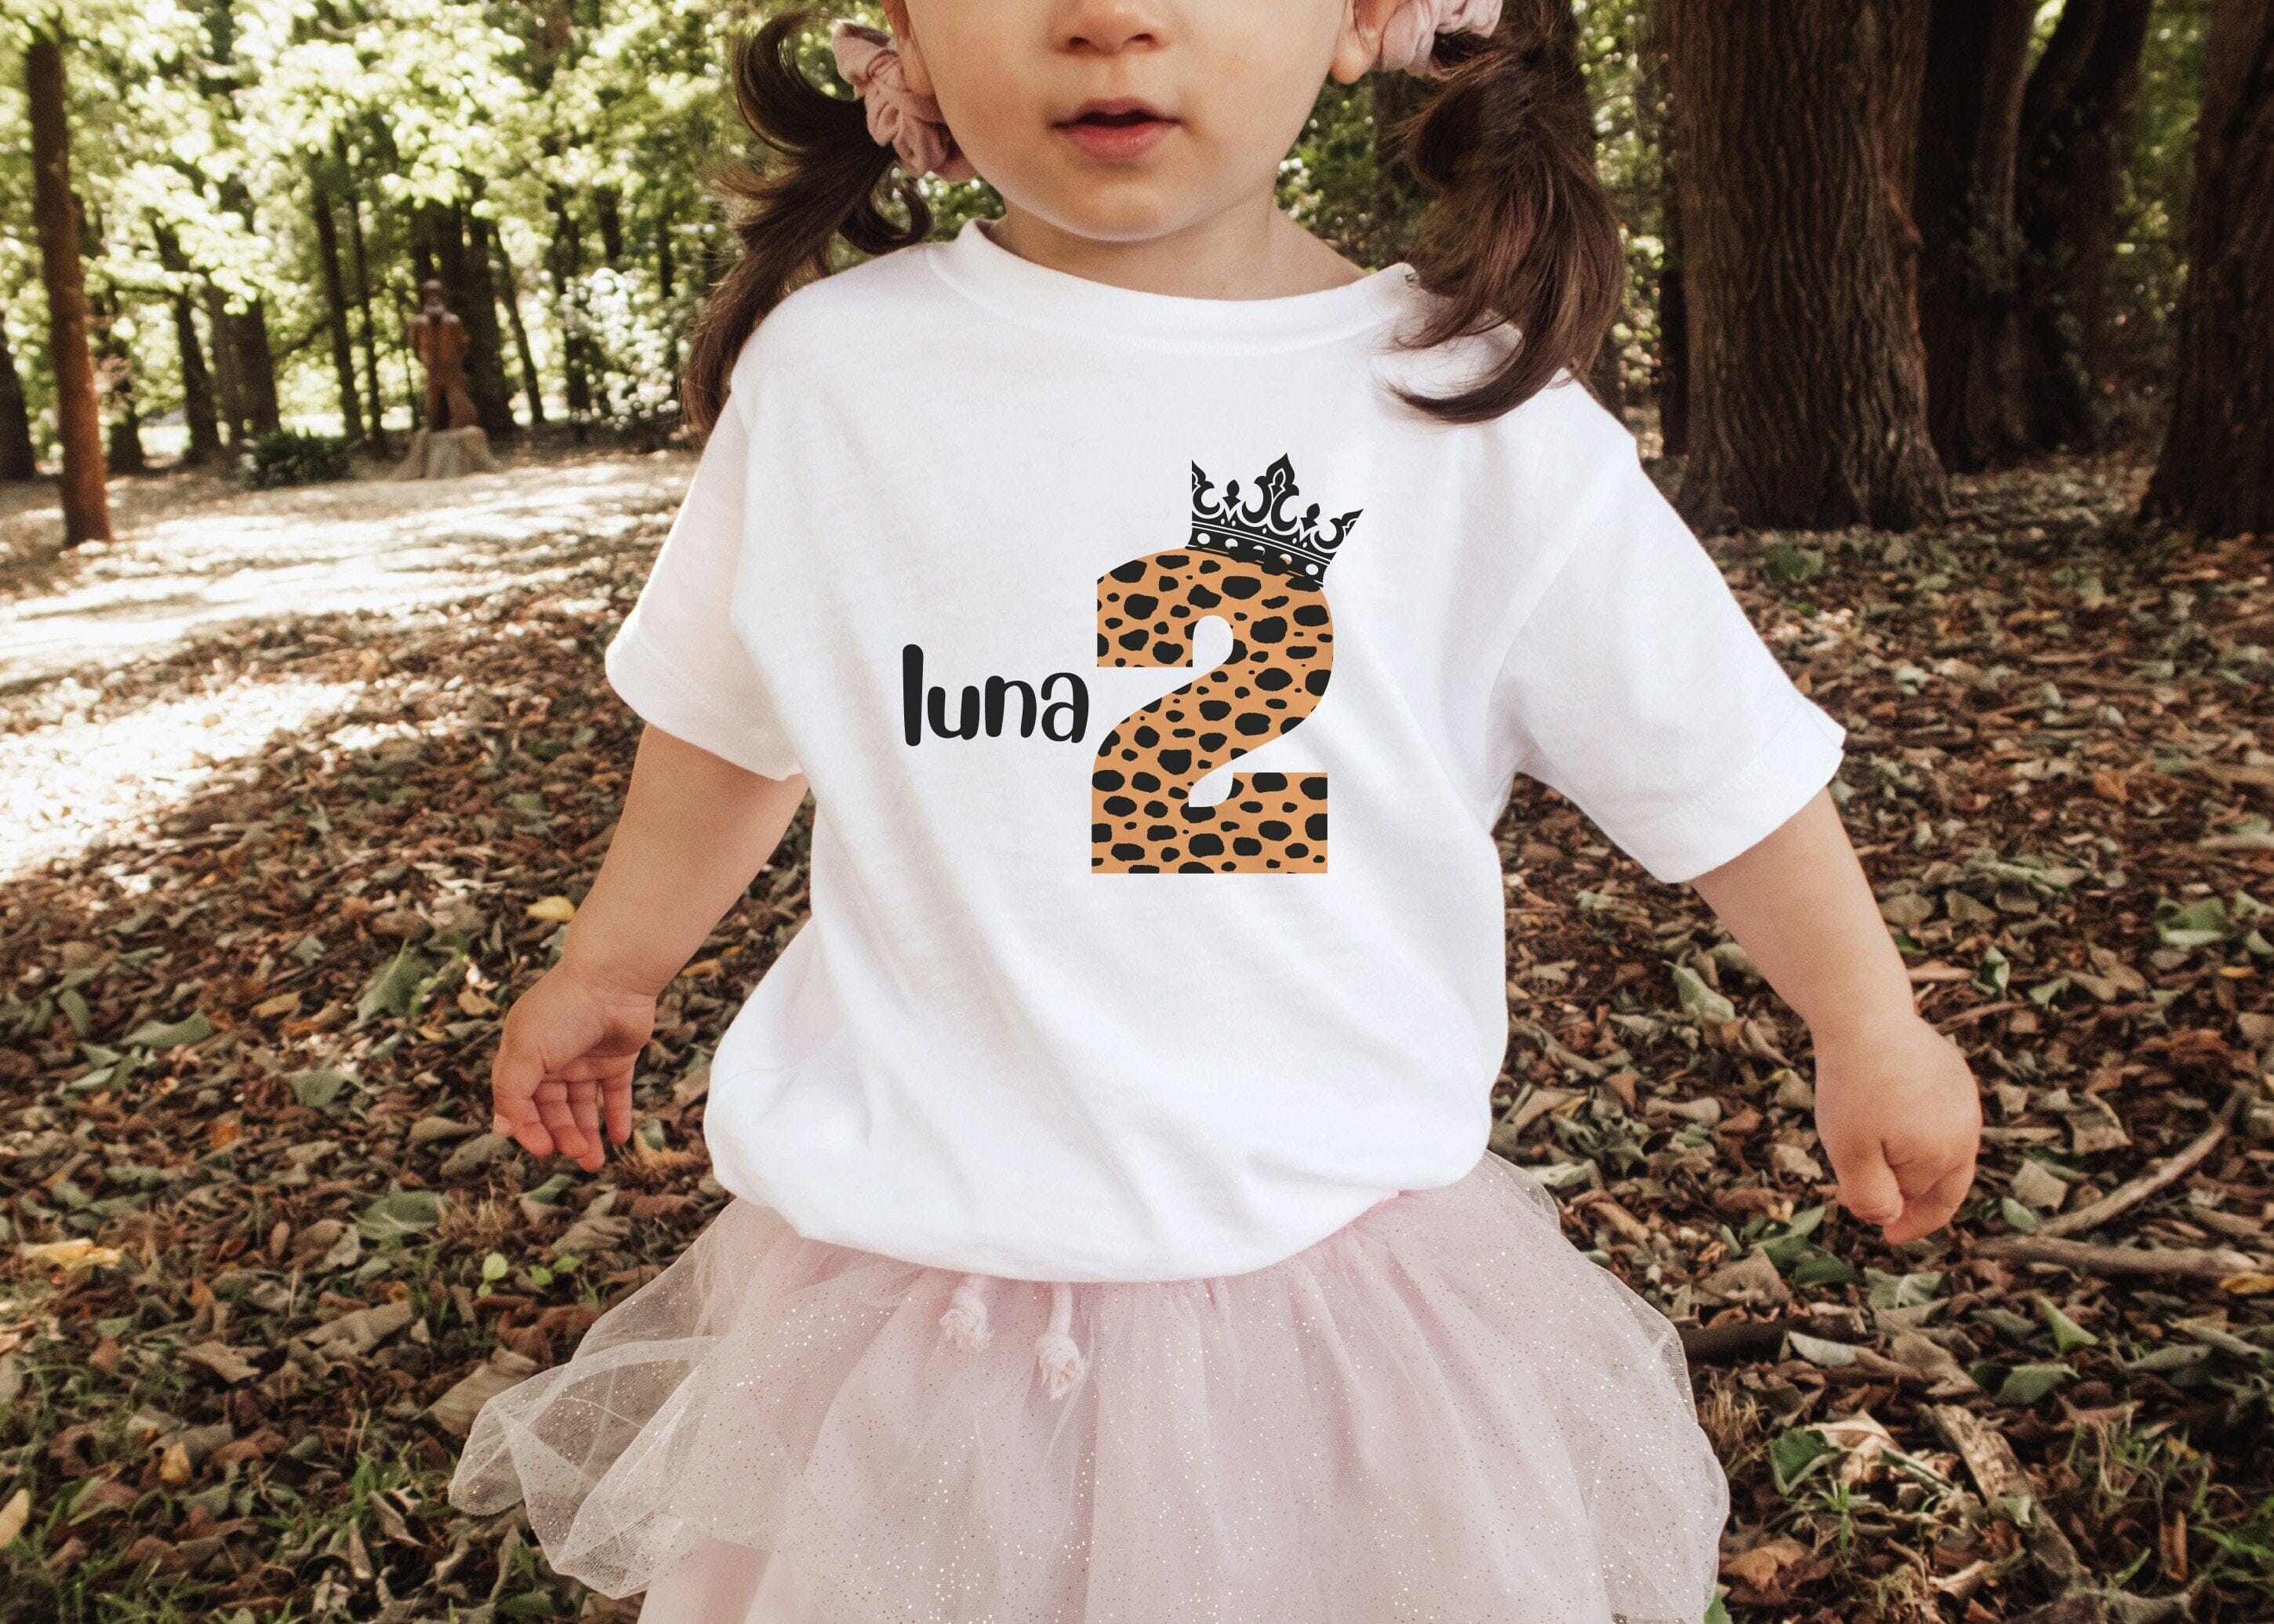 Personalised Leopard and Crown Kids Birthday T-shirt, Birthday Boy Girl T shirt Top, Gift Cute Themed